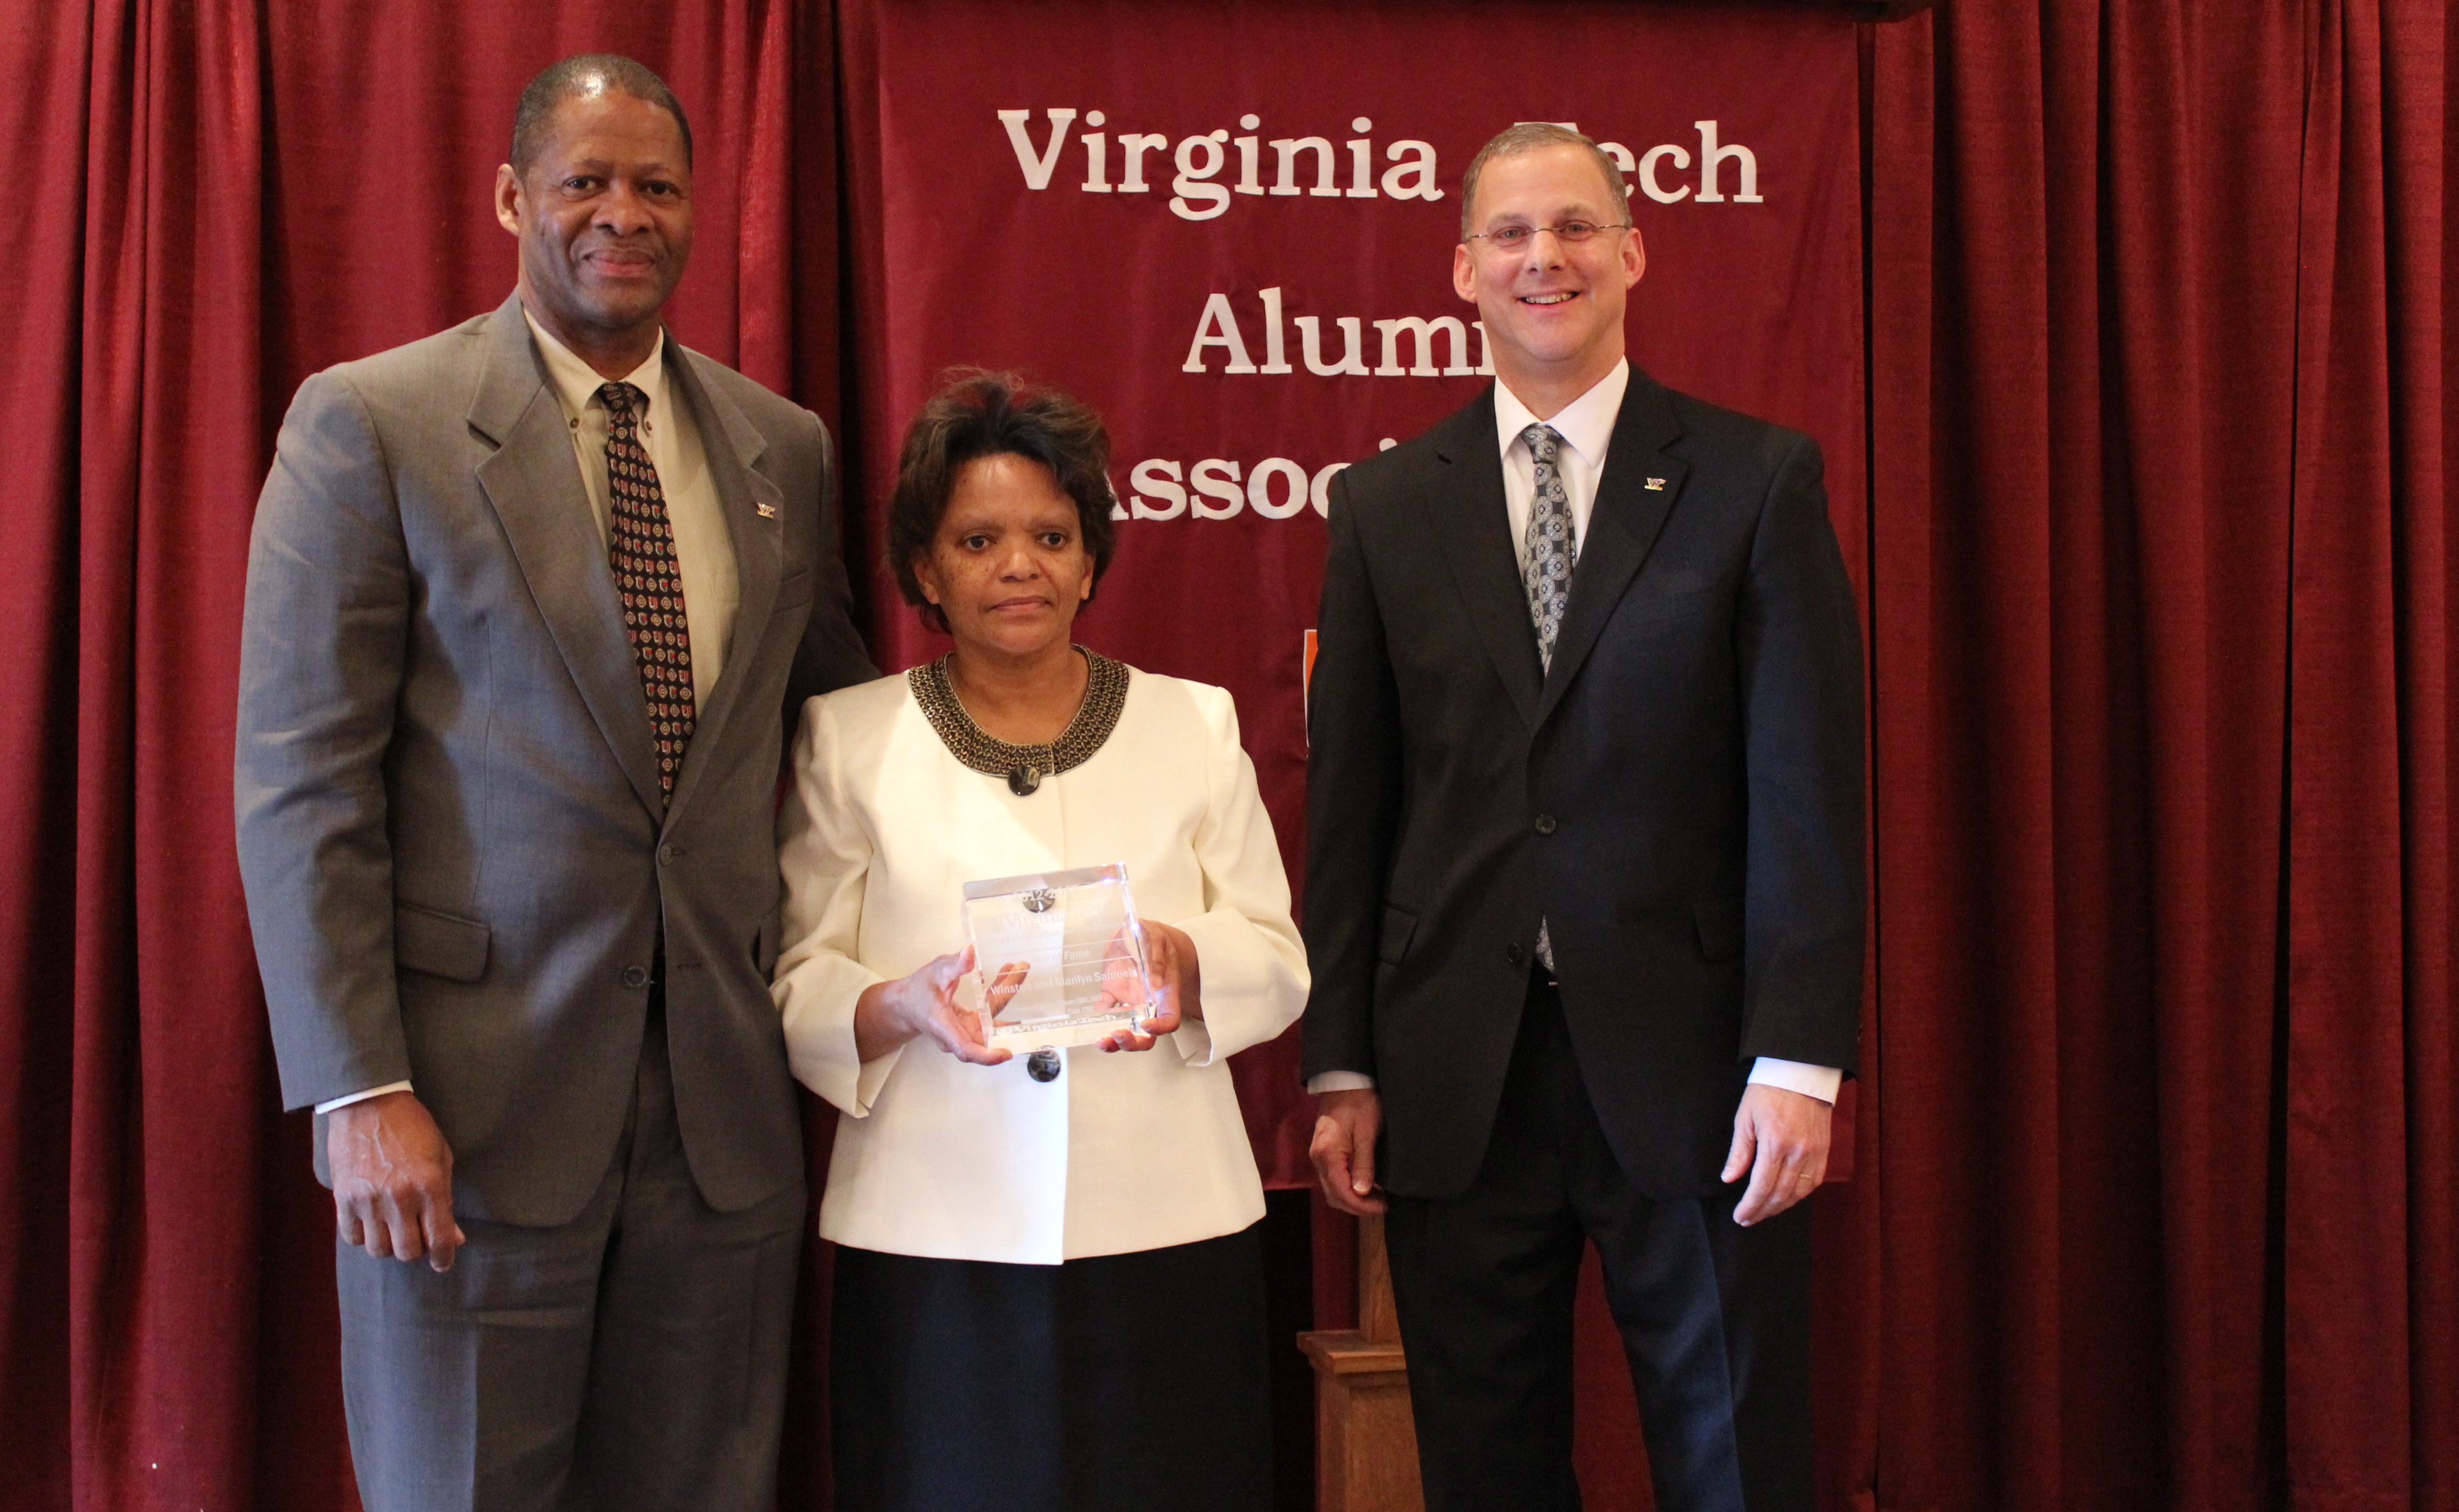 Alan Grant, dean of the College of Agriculture and Life Sciences, inducts Winston and Marilyn Samuels into the Virginia Tech College of Agriculture and Life Sciences Hall of Fame.